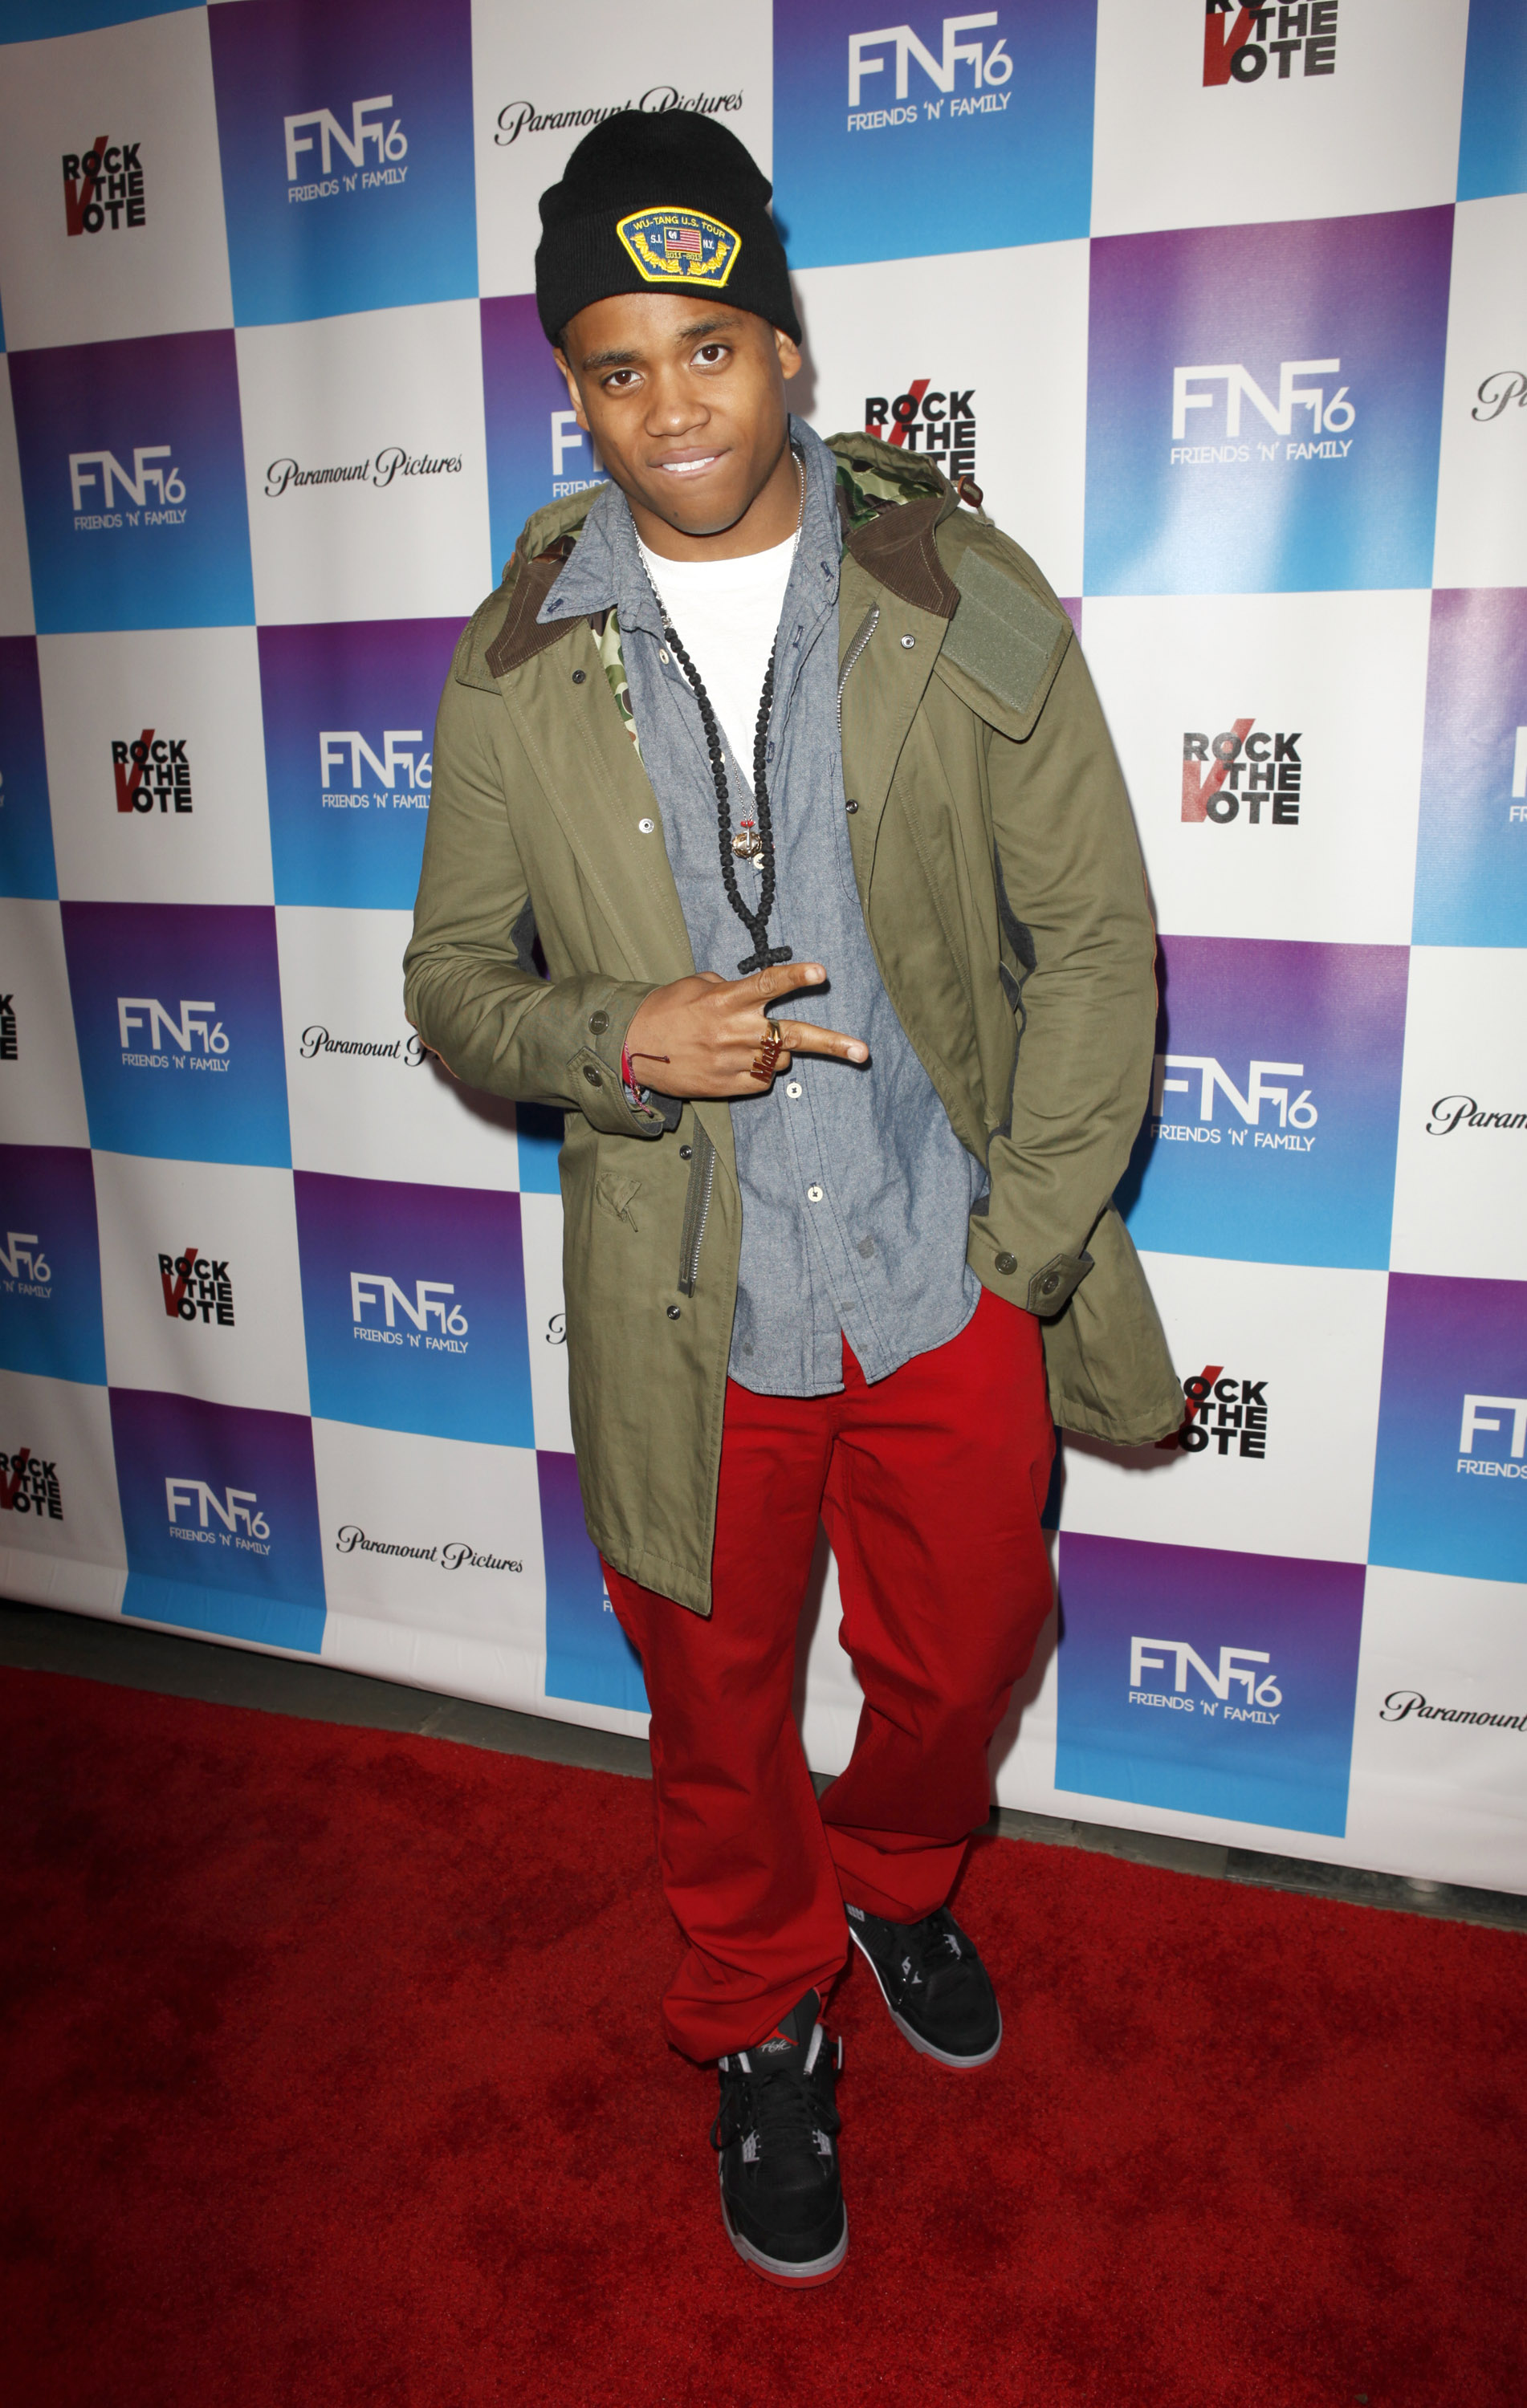 Tristan Wilds at The 16th Annual Friends 'N' Family Pre-Grammy Party